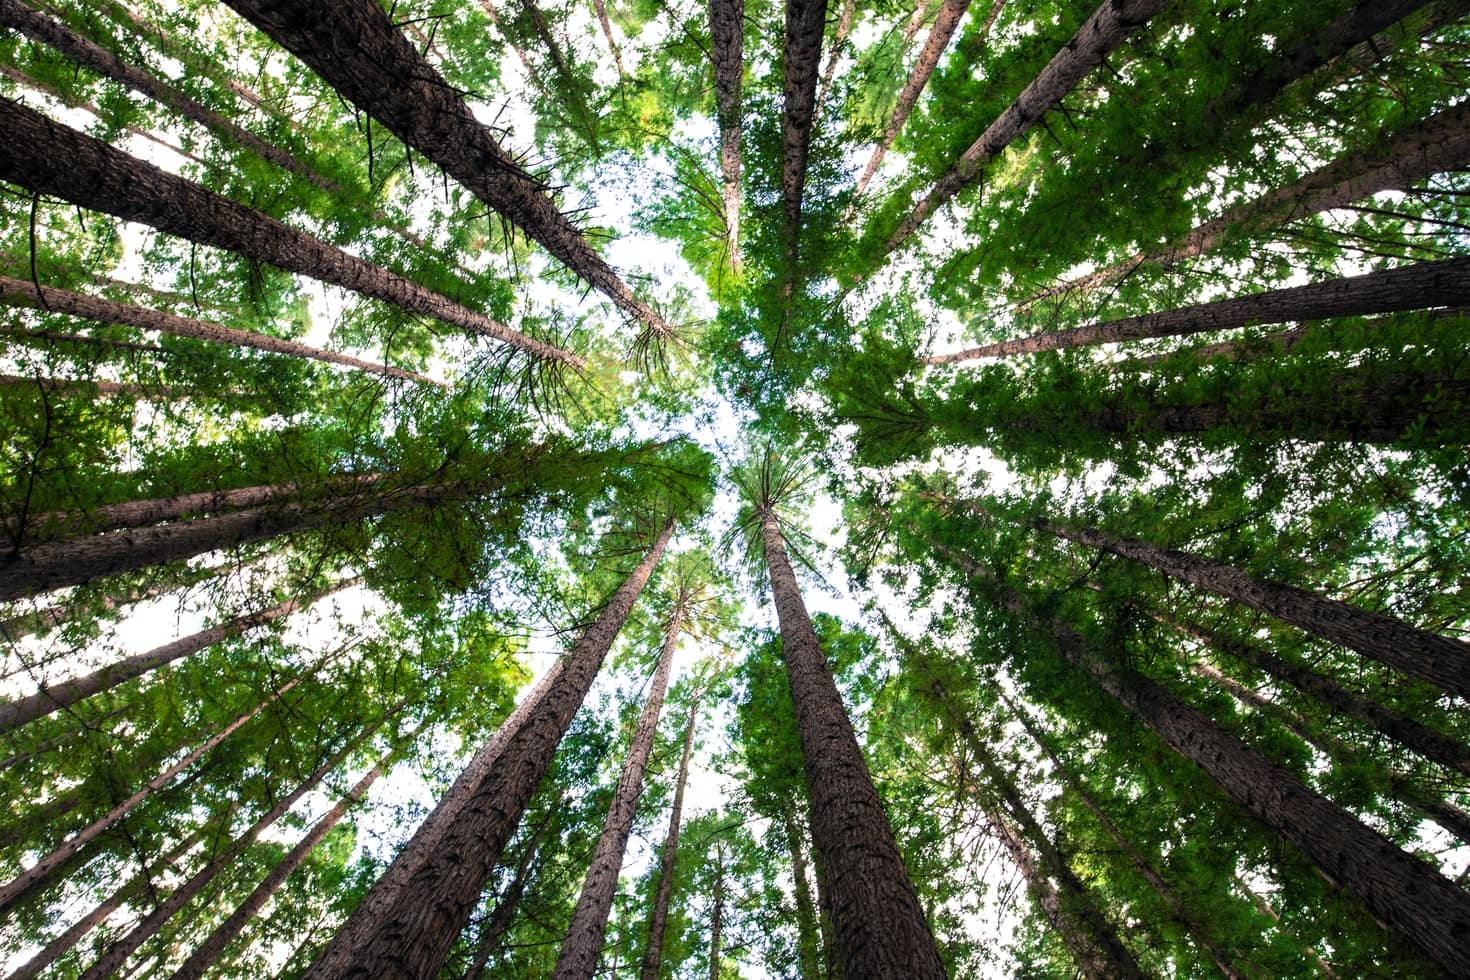 looking up at tops of trees in forest